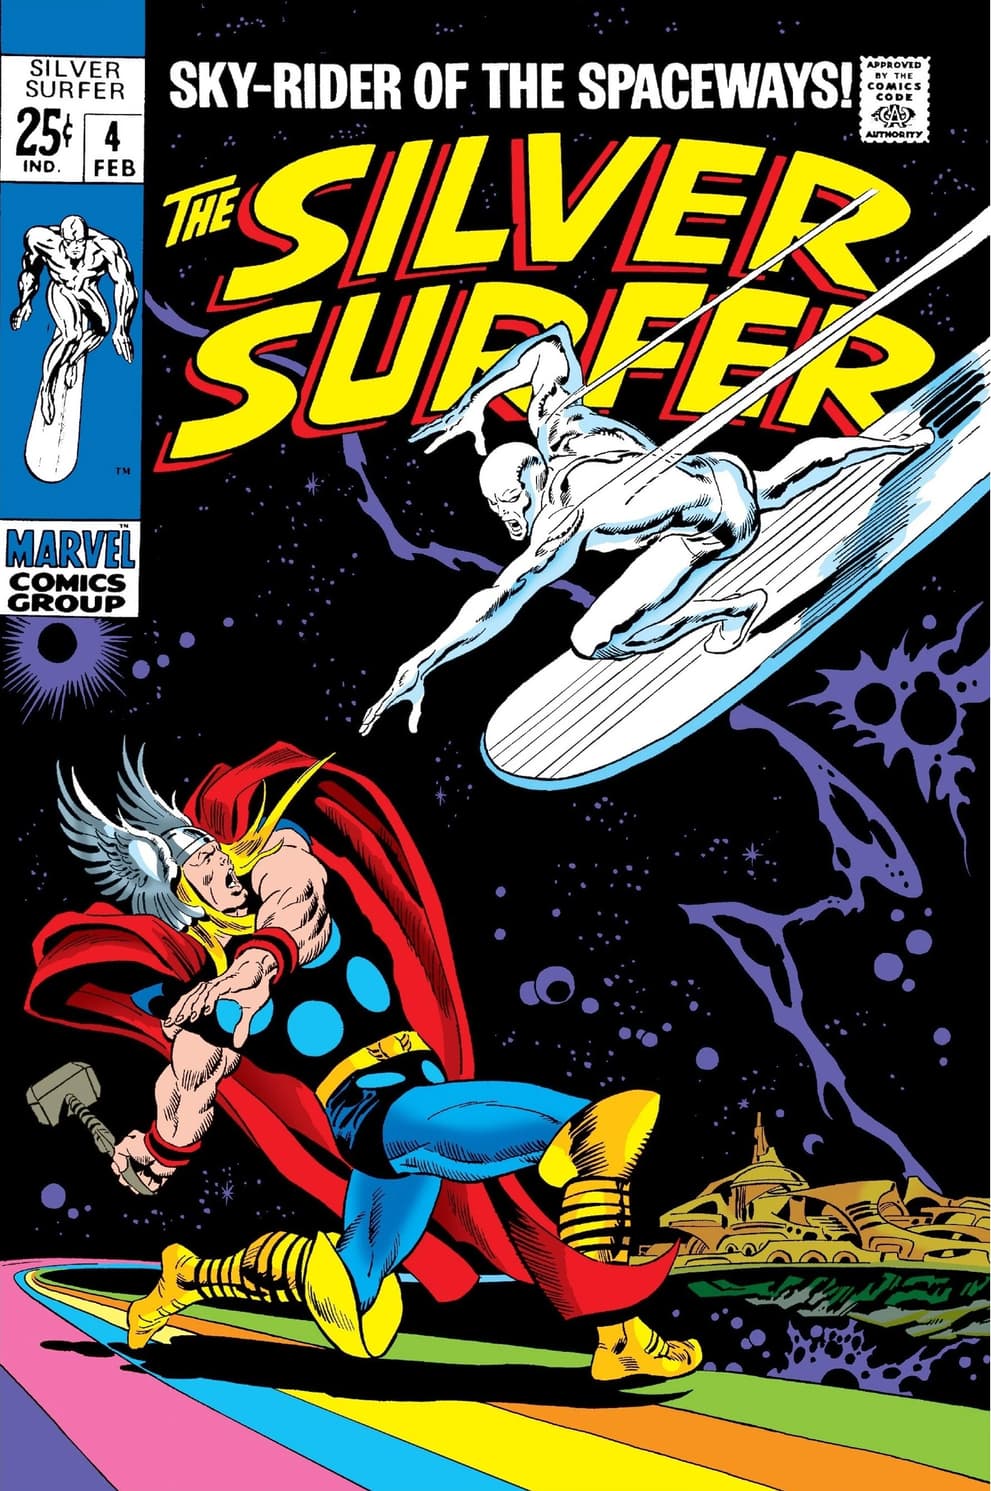 SILVER SURFER (1968) #4 cover by John Buscema and Sal Buscema